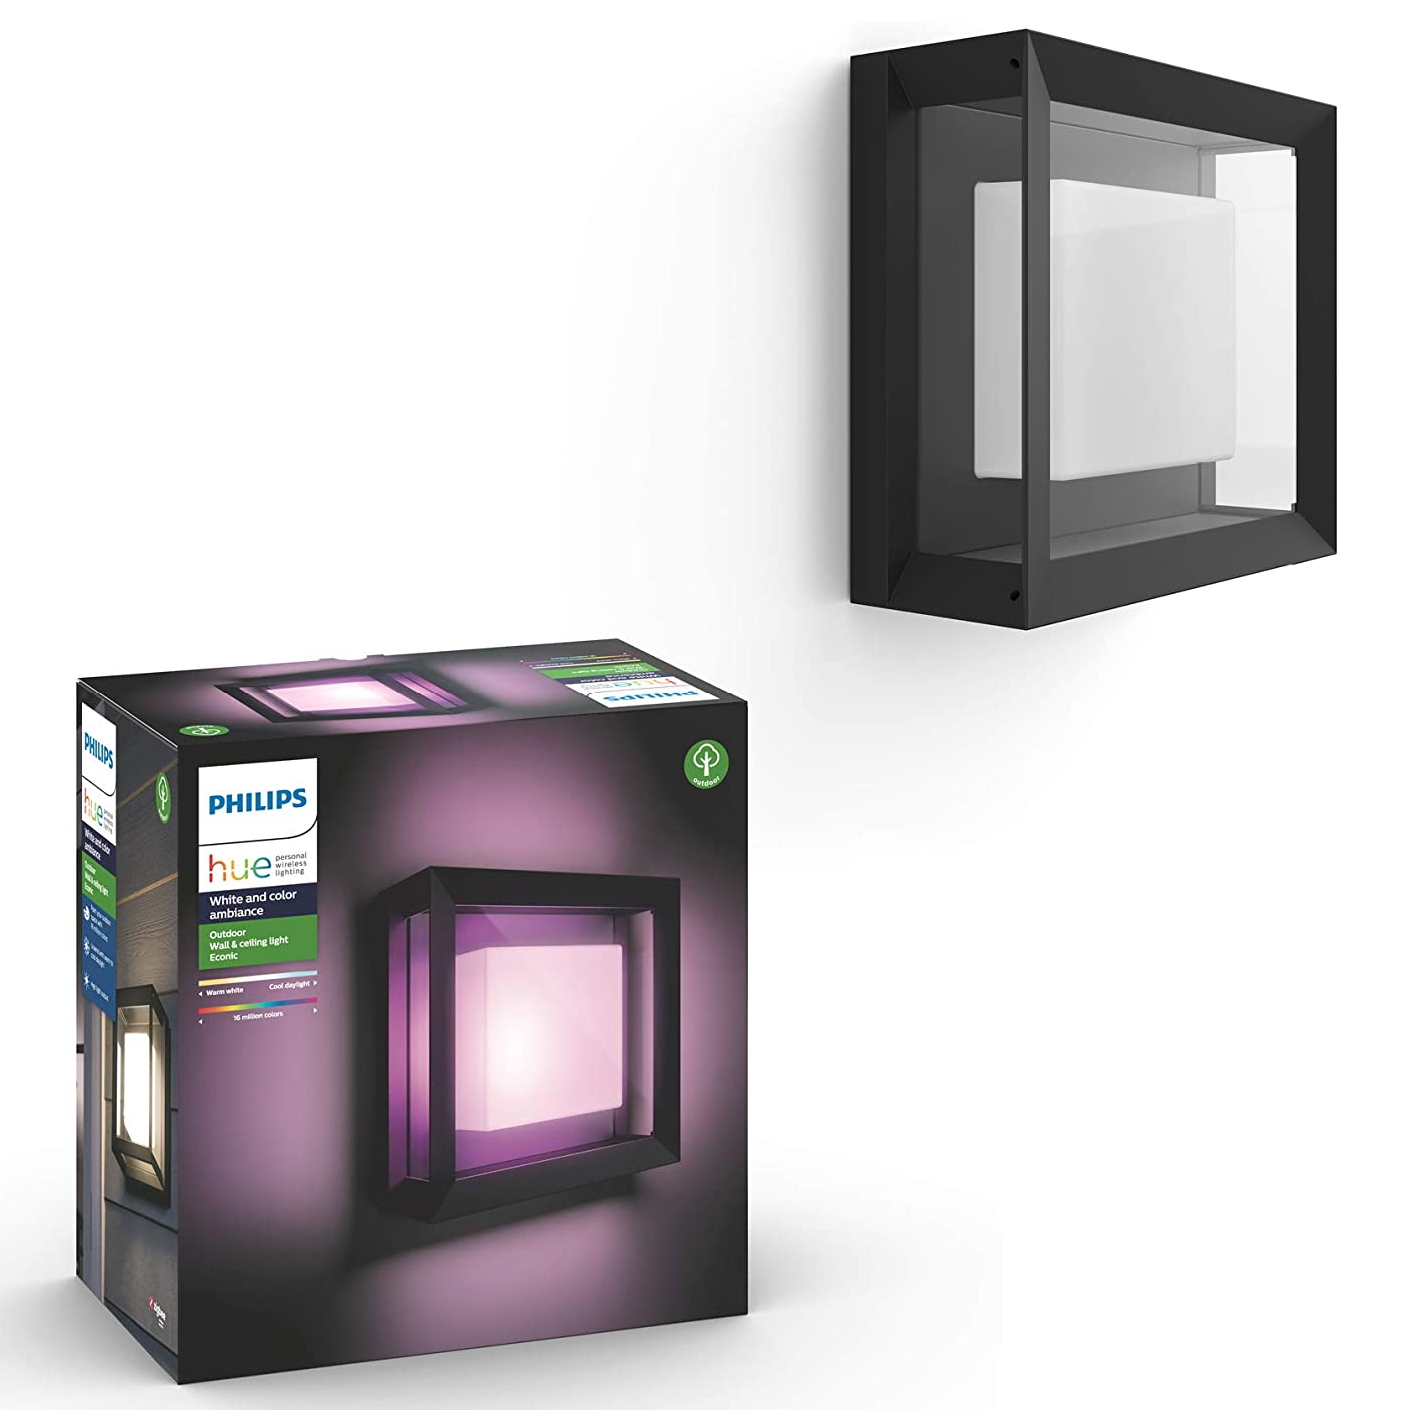 Philips Hue Econic Wall & Ceiling Fixture